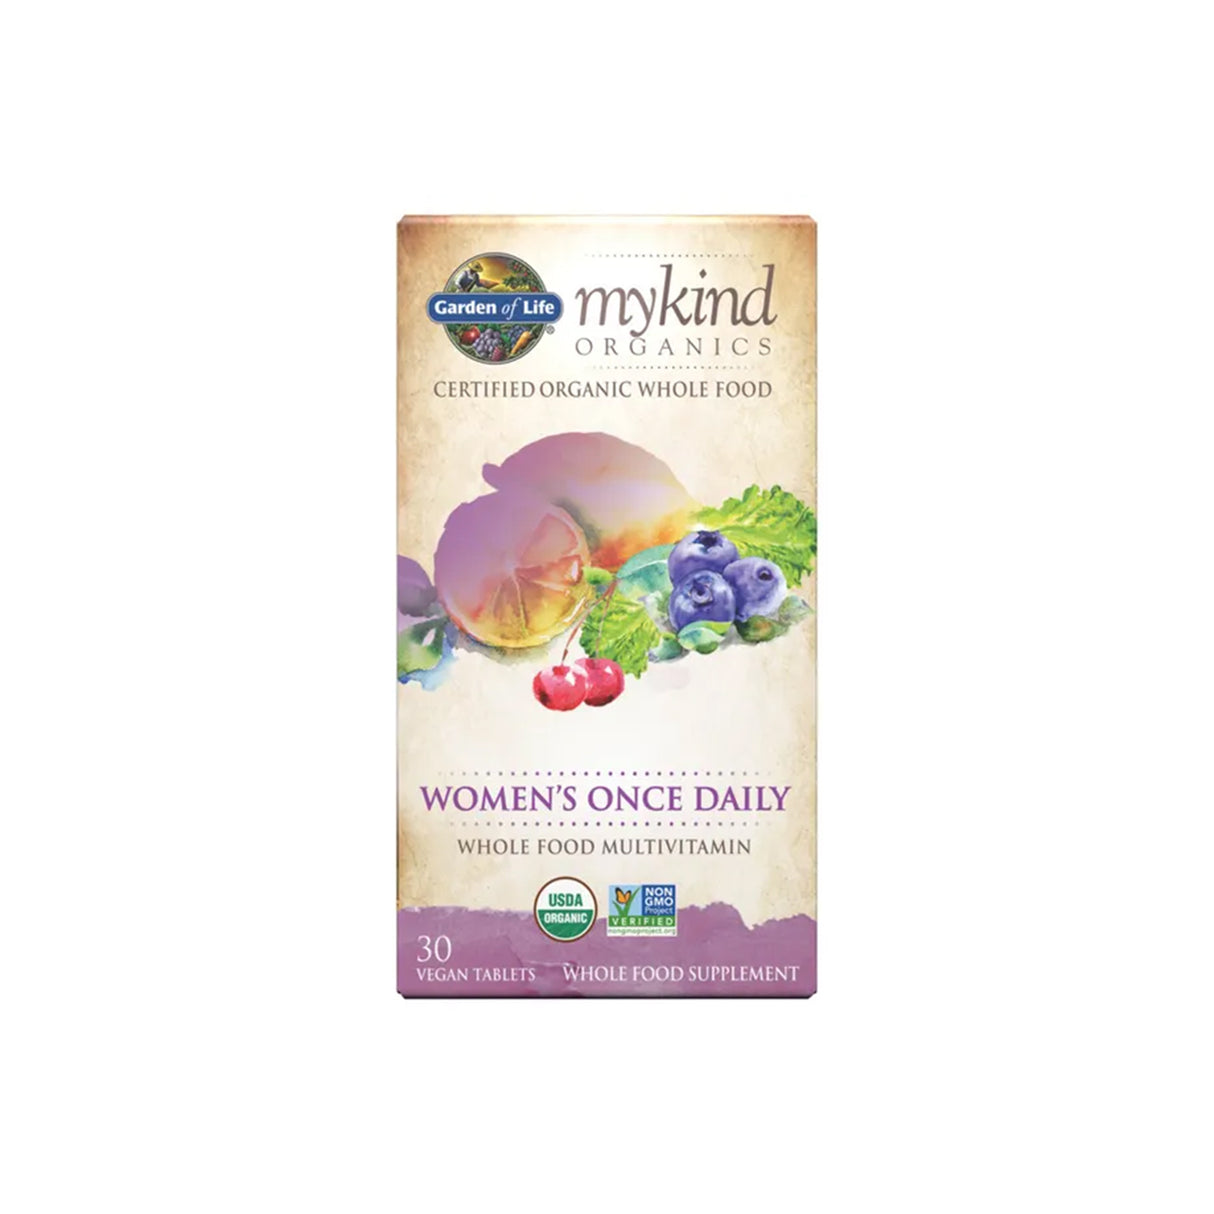 Garden of Life Mykind Organics Women's Once Daily 60 Tablets